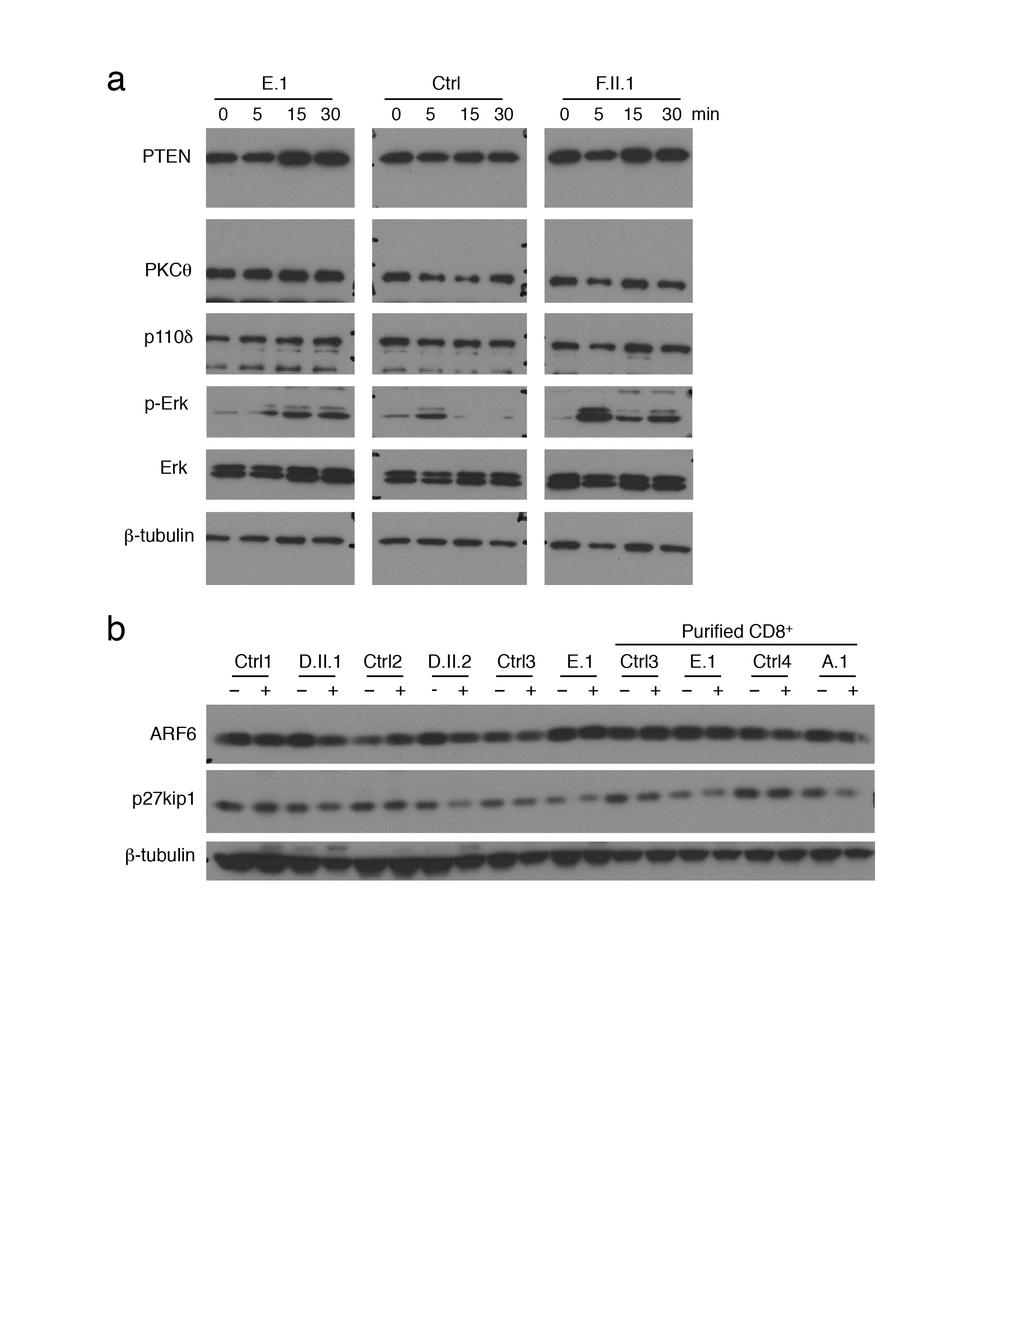 Supplementary Figure 7. Normal expression of signaling molecules in patient T cell blasts. (a) Immunoblots for PTEN, PKCθ, p110δ, p- Erk, total Erk, and β- tubulin in T cell lysates from patients E.